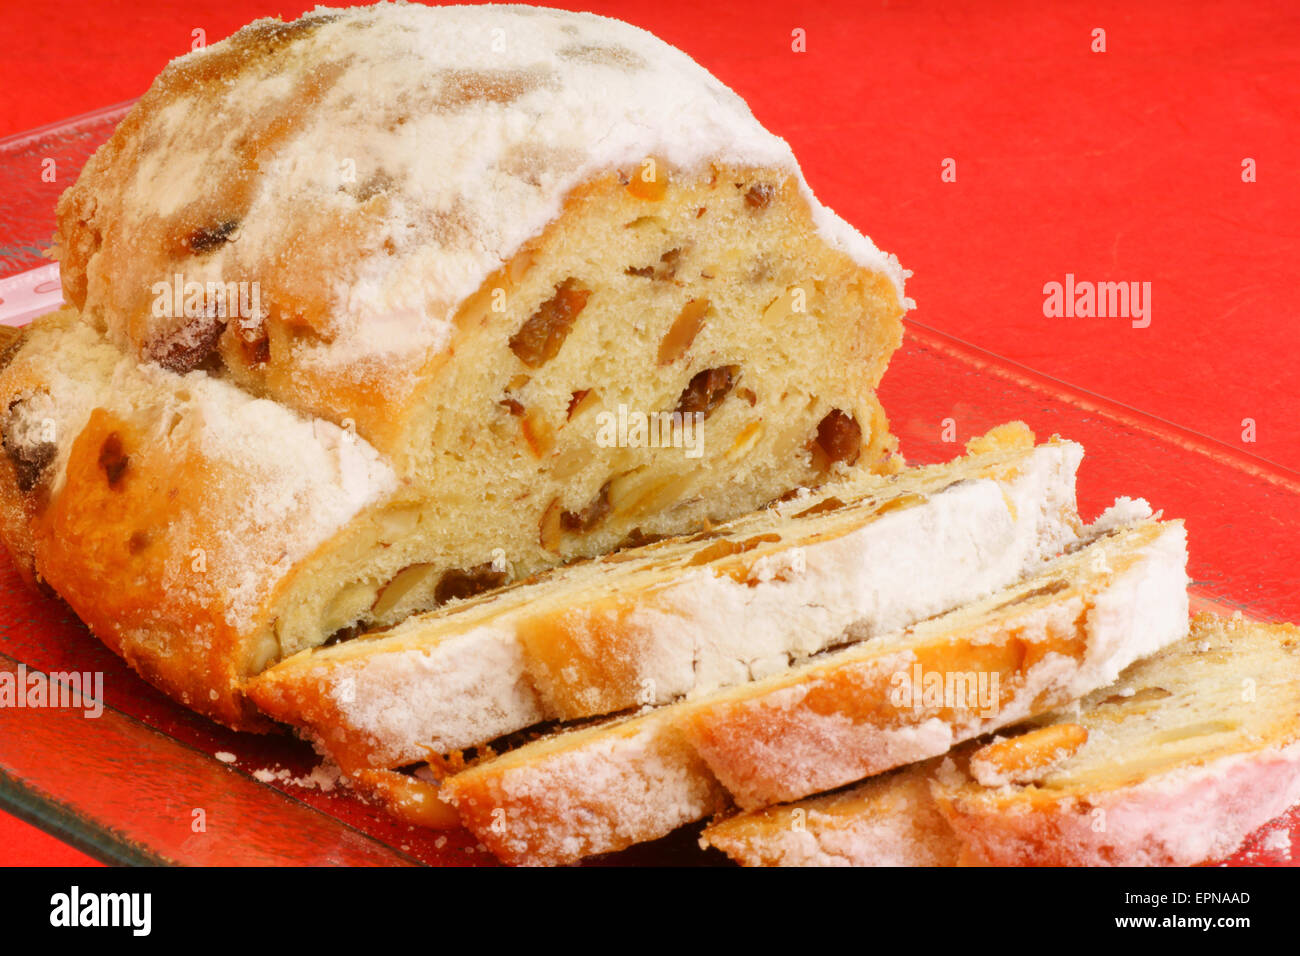 Sliced Christmas stollen the traditional german fruit cake made of bread-like pastry with candied fruit, almonds, cardamom and c Stock Photo